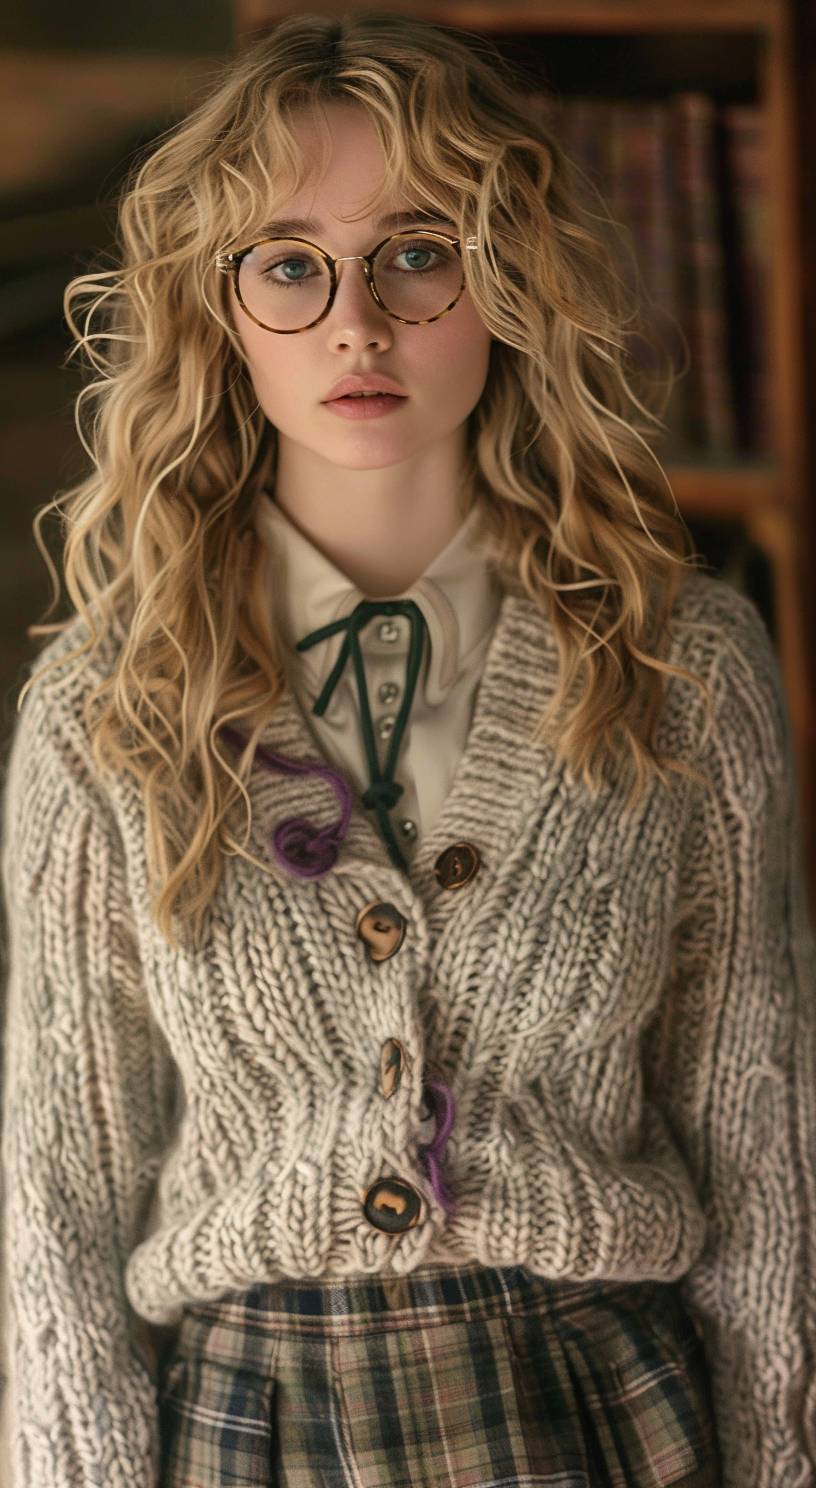 Jennifer Lawrence in schoolgirl glasses, wearing traditional Irish cableknit cardigan outfit with a well-shaped roundneck Irish cableknit mohair sweater costume, wearing a chunky tight fit turtleneck sweater and cardigan lookbook. The cardigan with closed buttons, crewneck neckline, violet color cable knit angora cardigan cable knit, skirt and socks sneakers, blonde curly hair, sneakers, bright background, whole body, full body portrait.